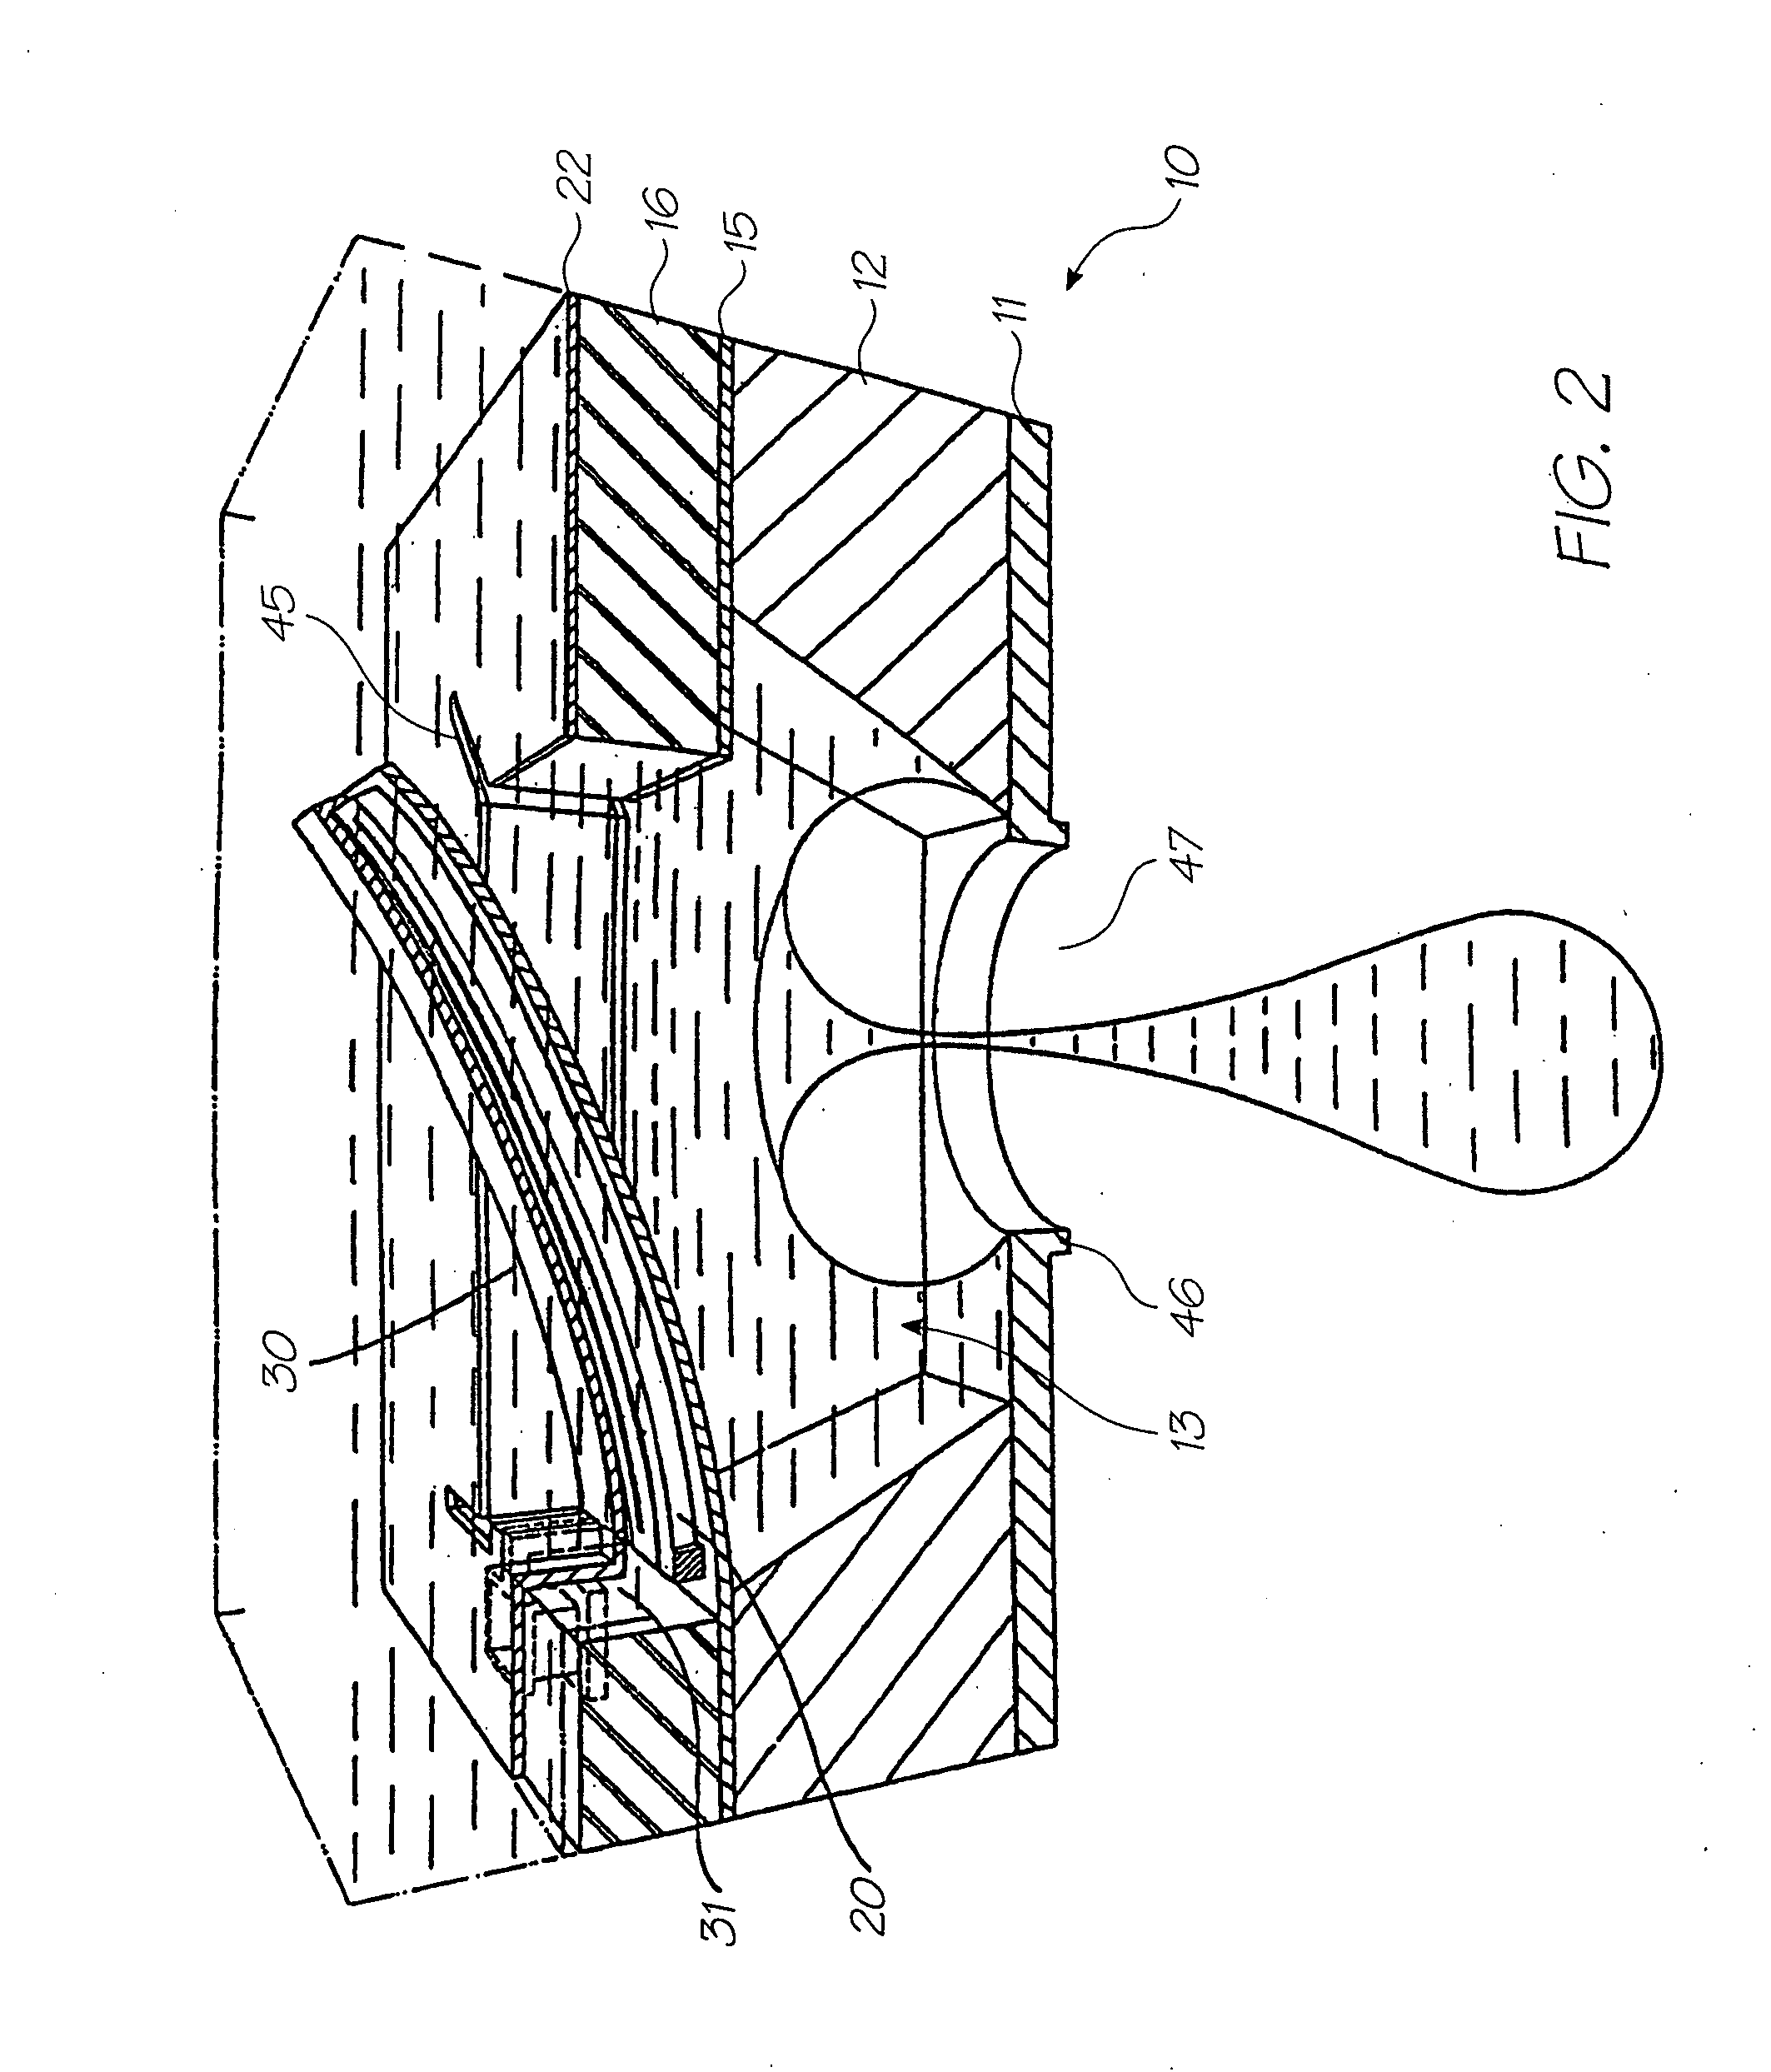 Inkjet printhead with filter structure at inlet to ink chambers